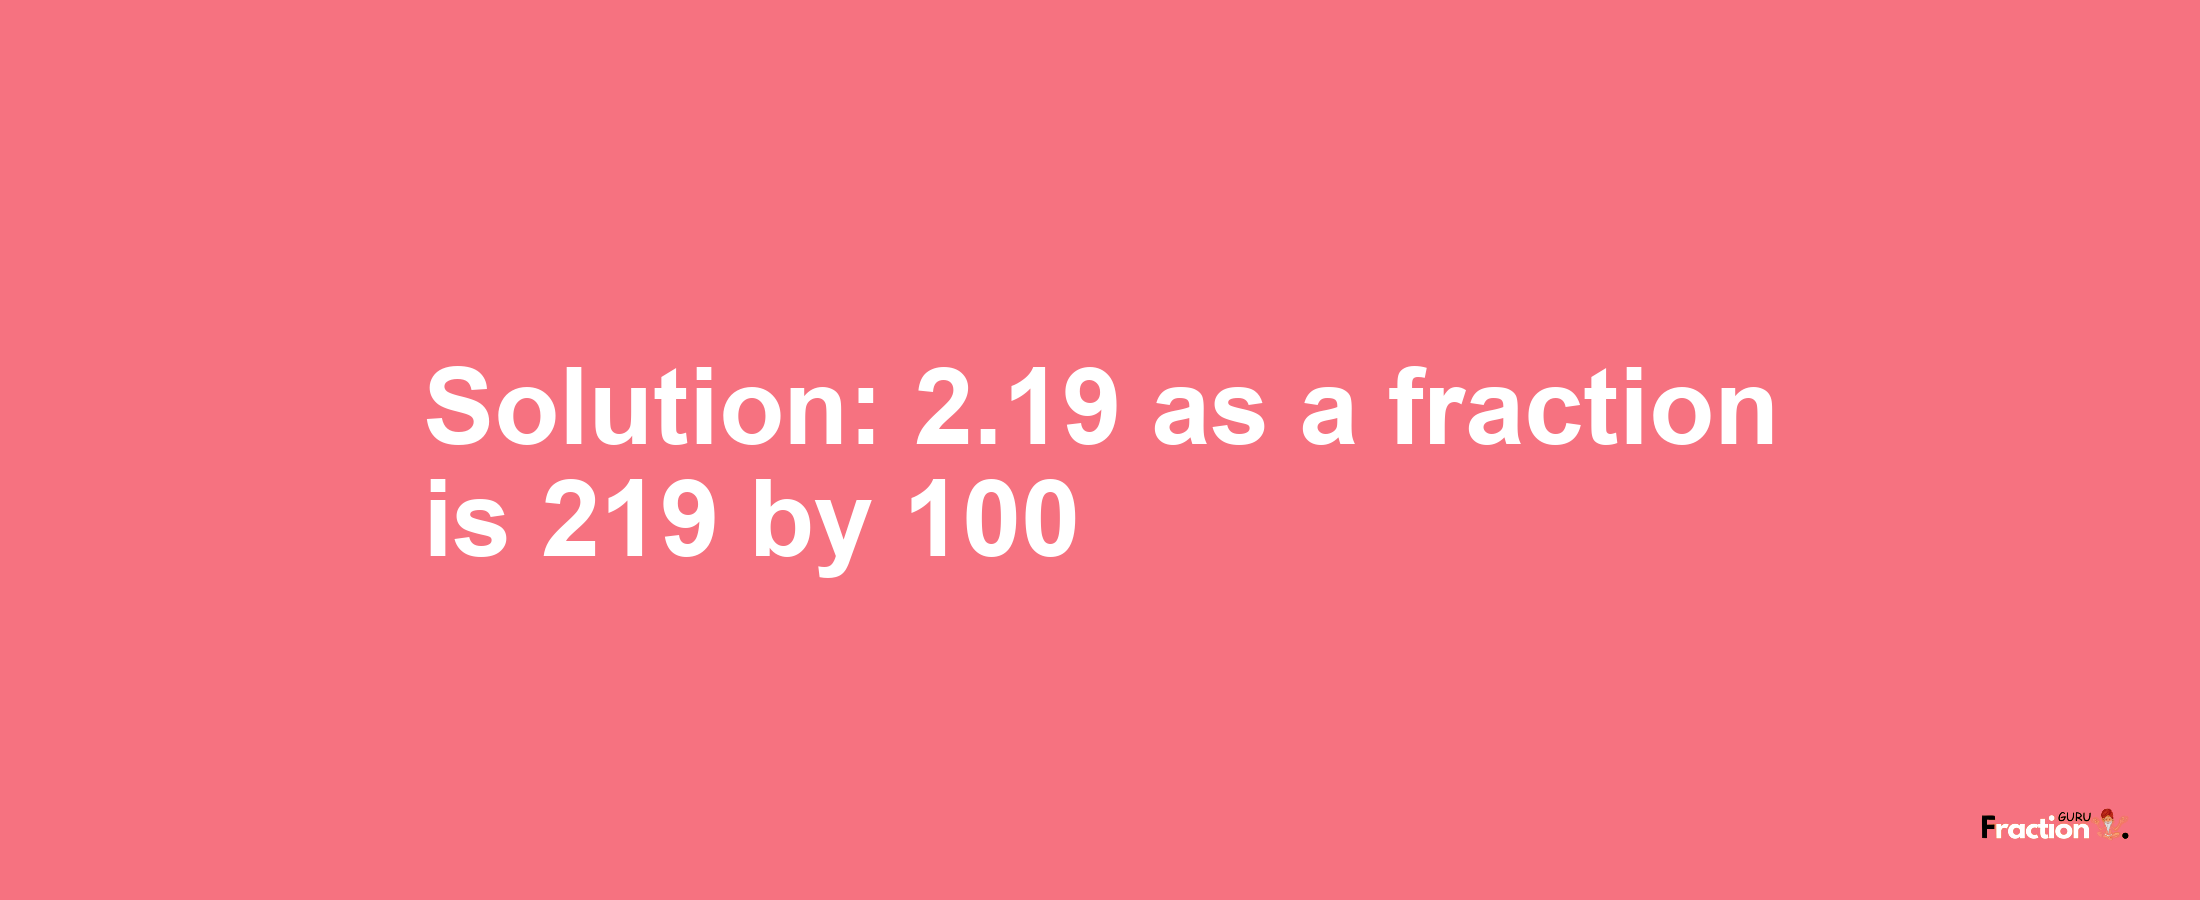 Solution:2.19 as a fraction is 219/100